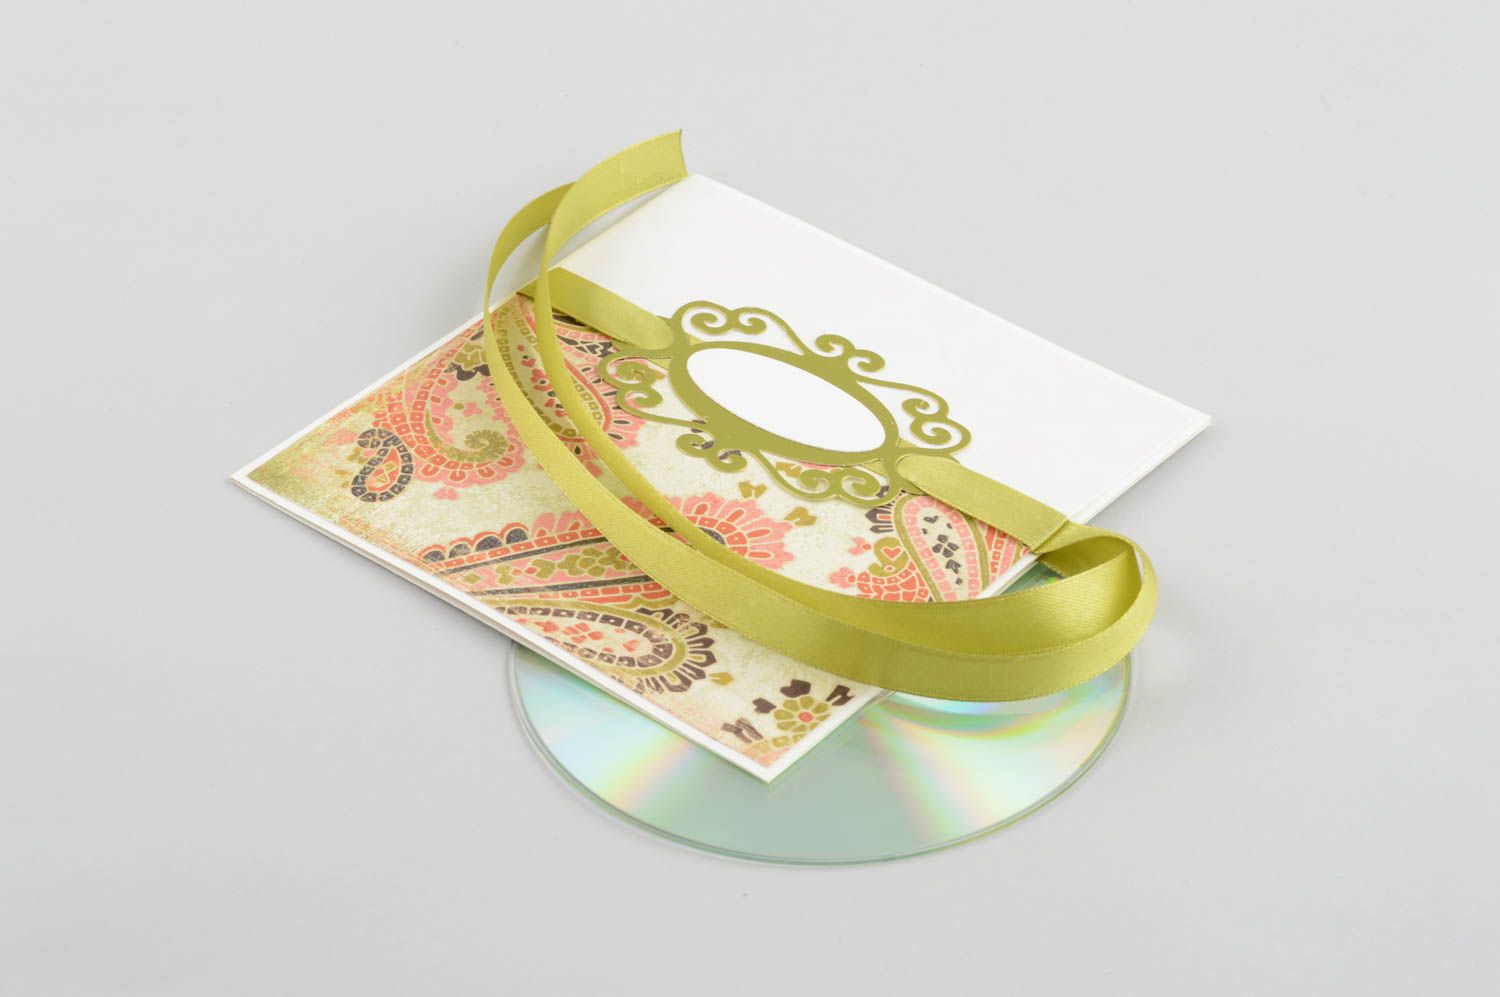 Handmade tender present unusual stylish envelope cute wrapping for disc photo 2